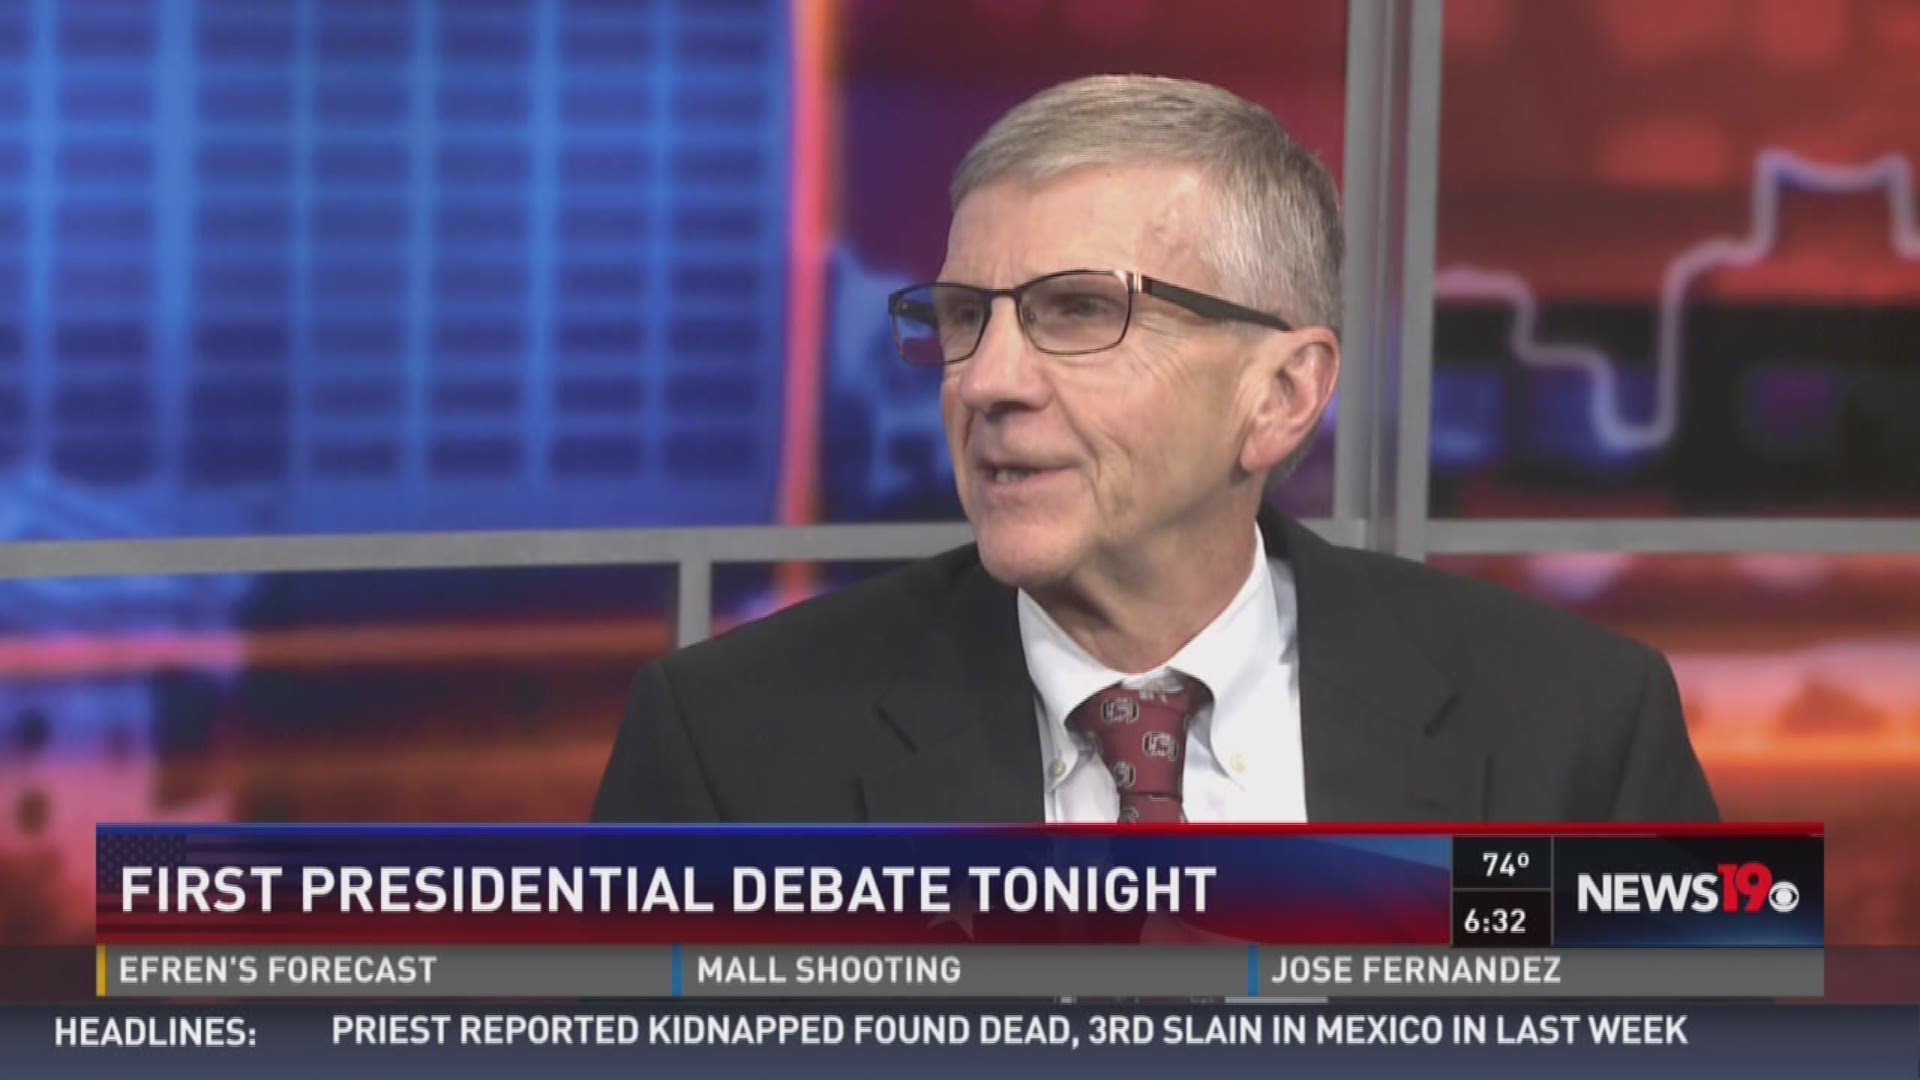 Everyone's talking about tonight's debate...including USC Political Science Professor, Robert Oldendick, who joined us to give an idea of just what we can expect.